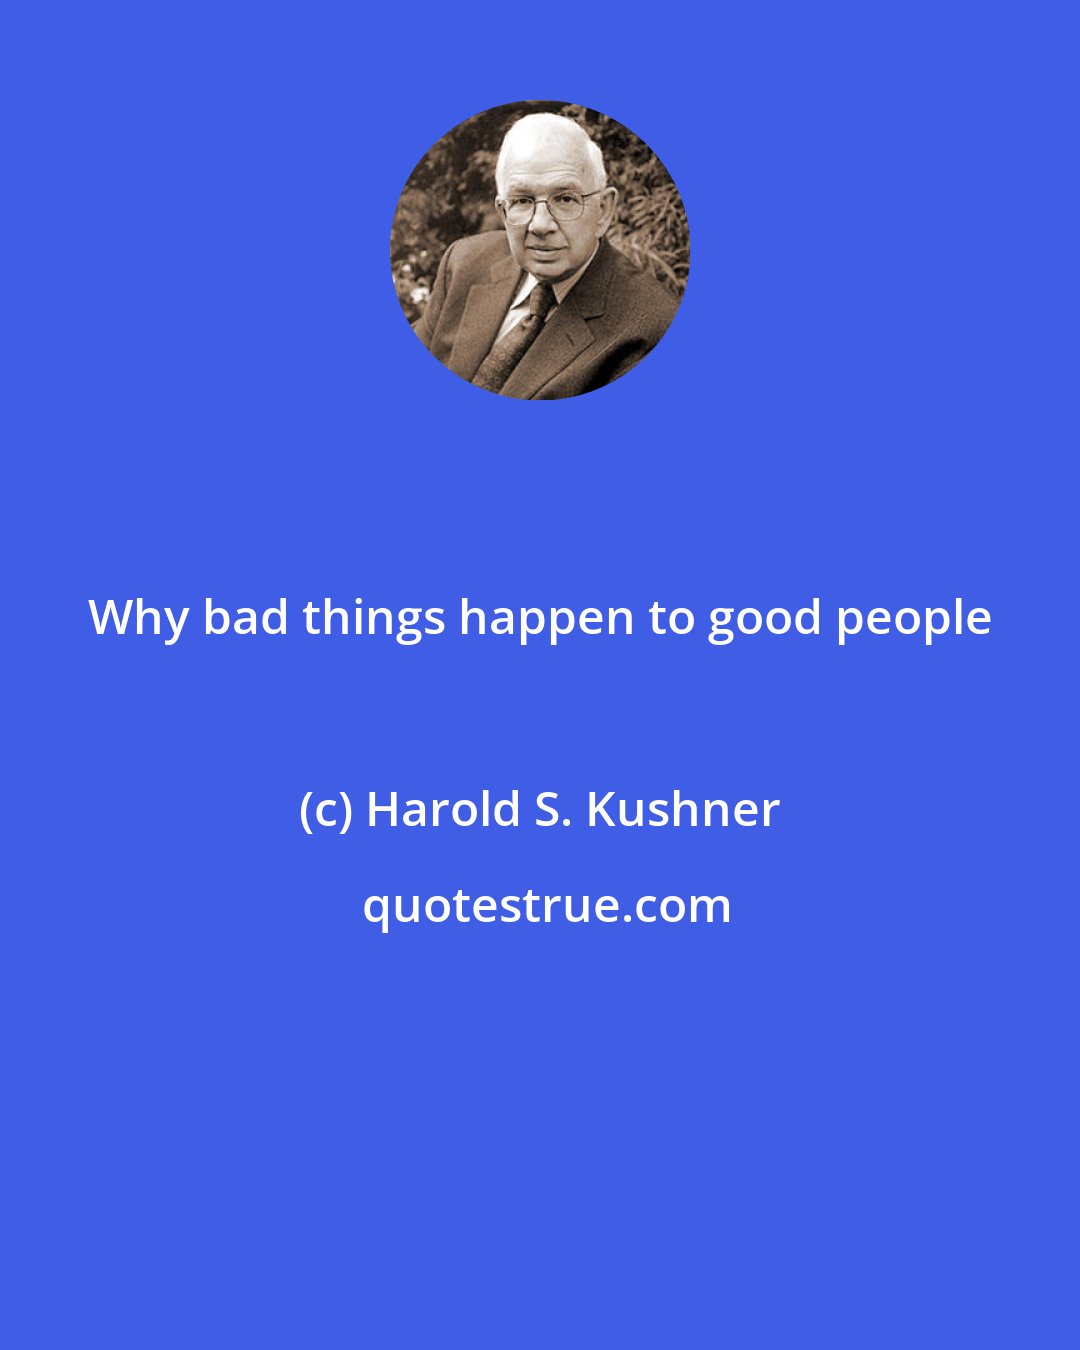 Harold S. Kushner: Why bad things happen to good people